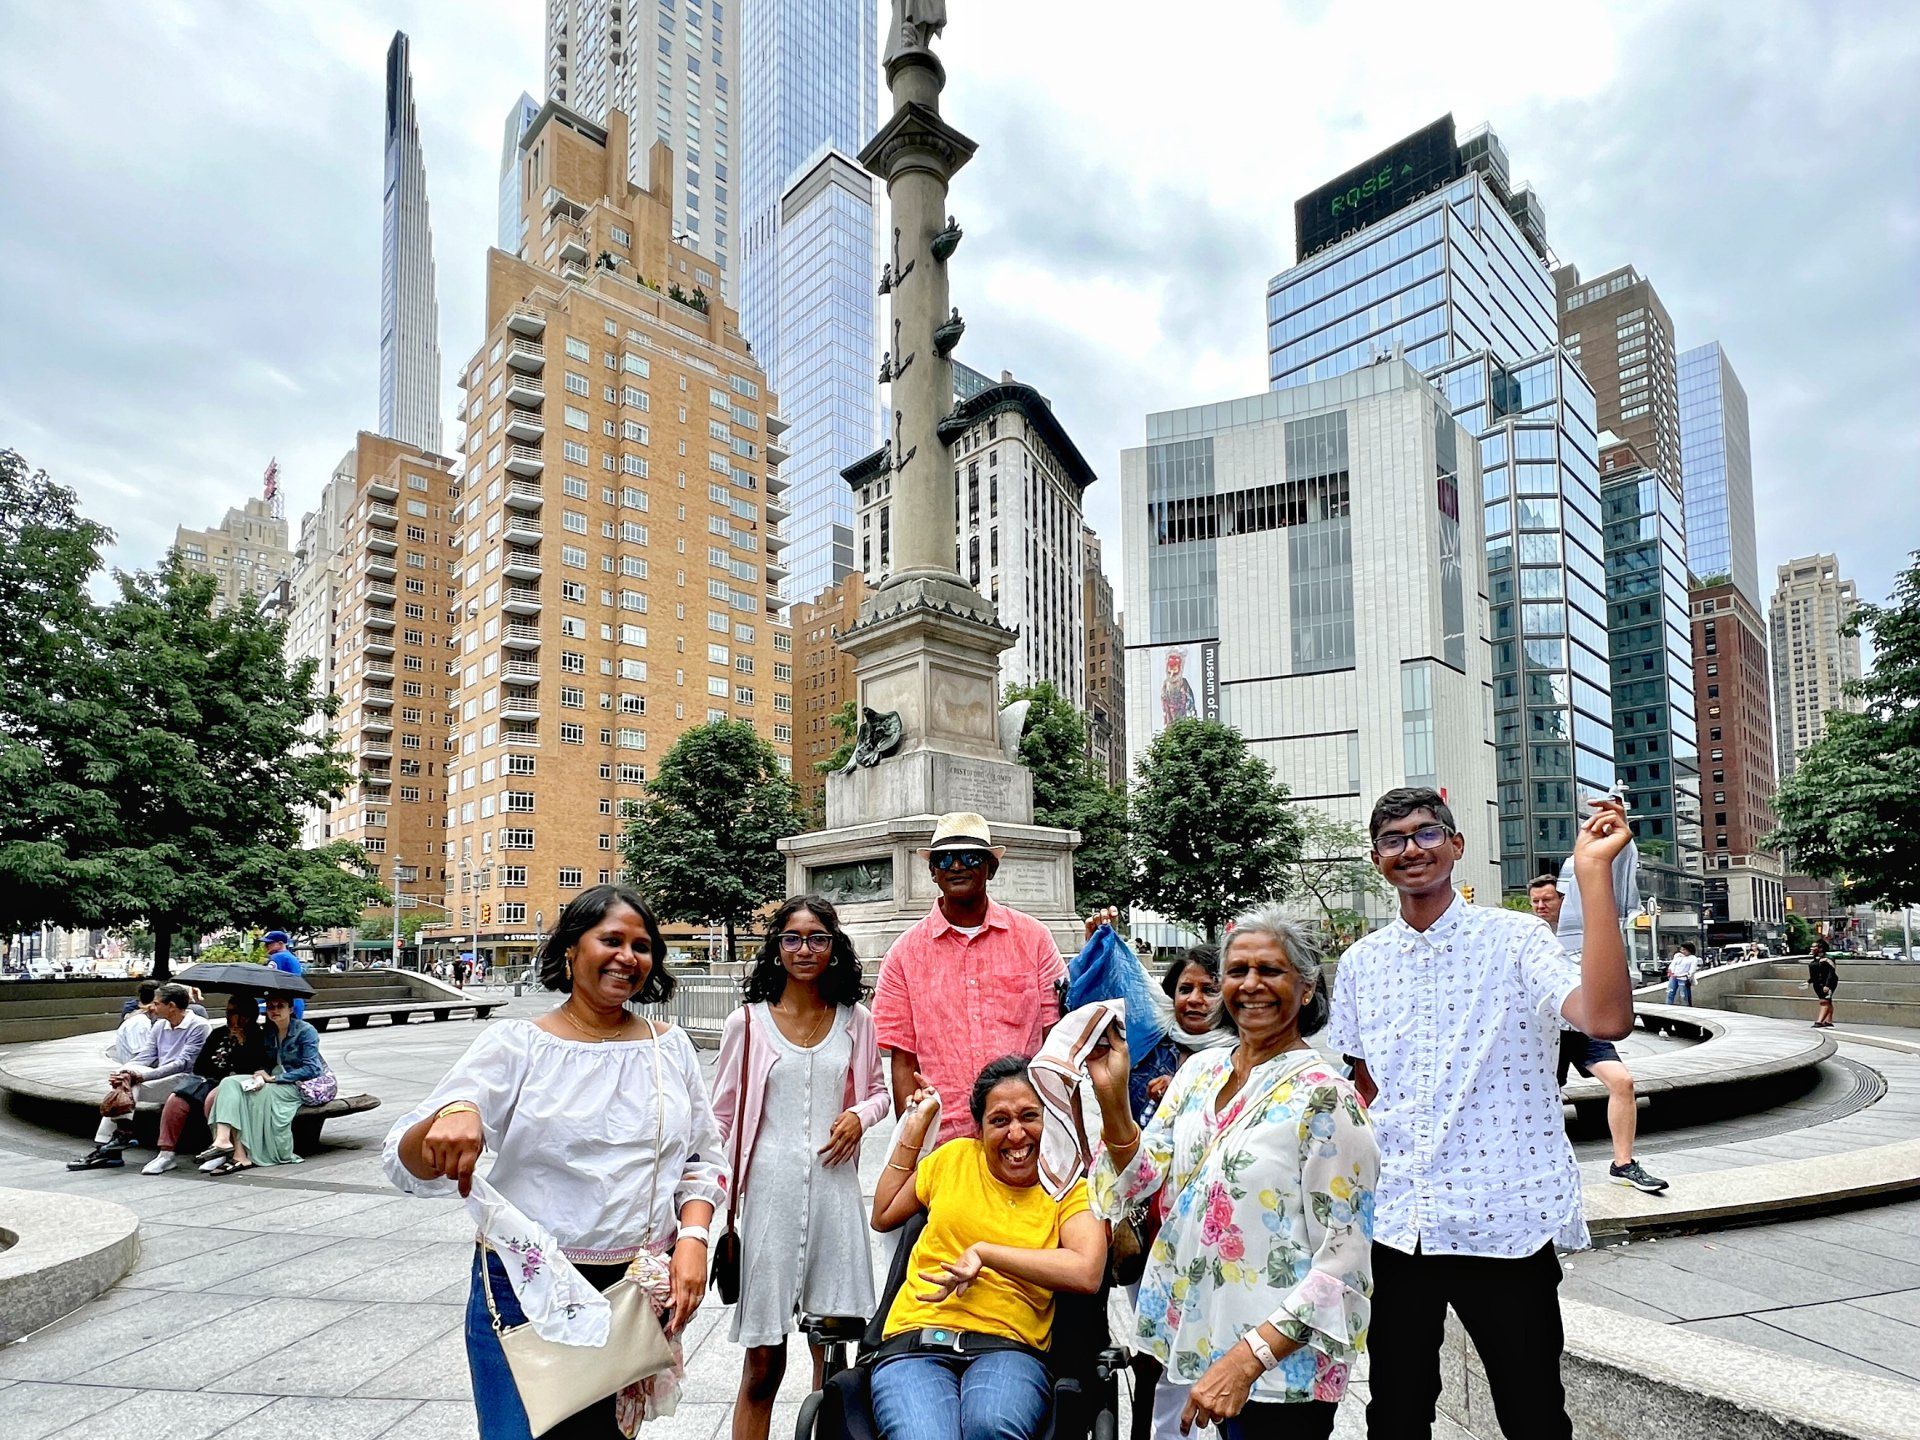 Our family of six, plus our aunt, all at Columbus Circle.  We're dressed colorfully, a cloudy day, holding up our kerchiefs while waiting for the Jazz Procession.